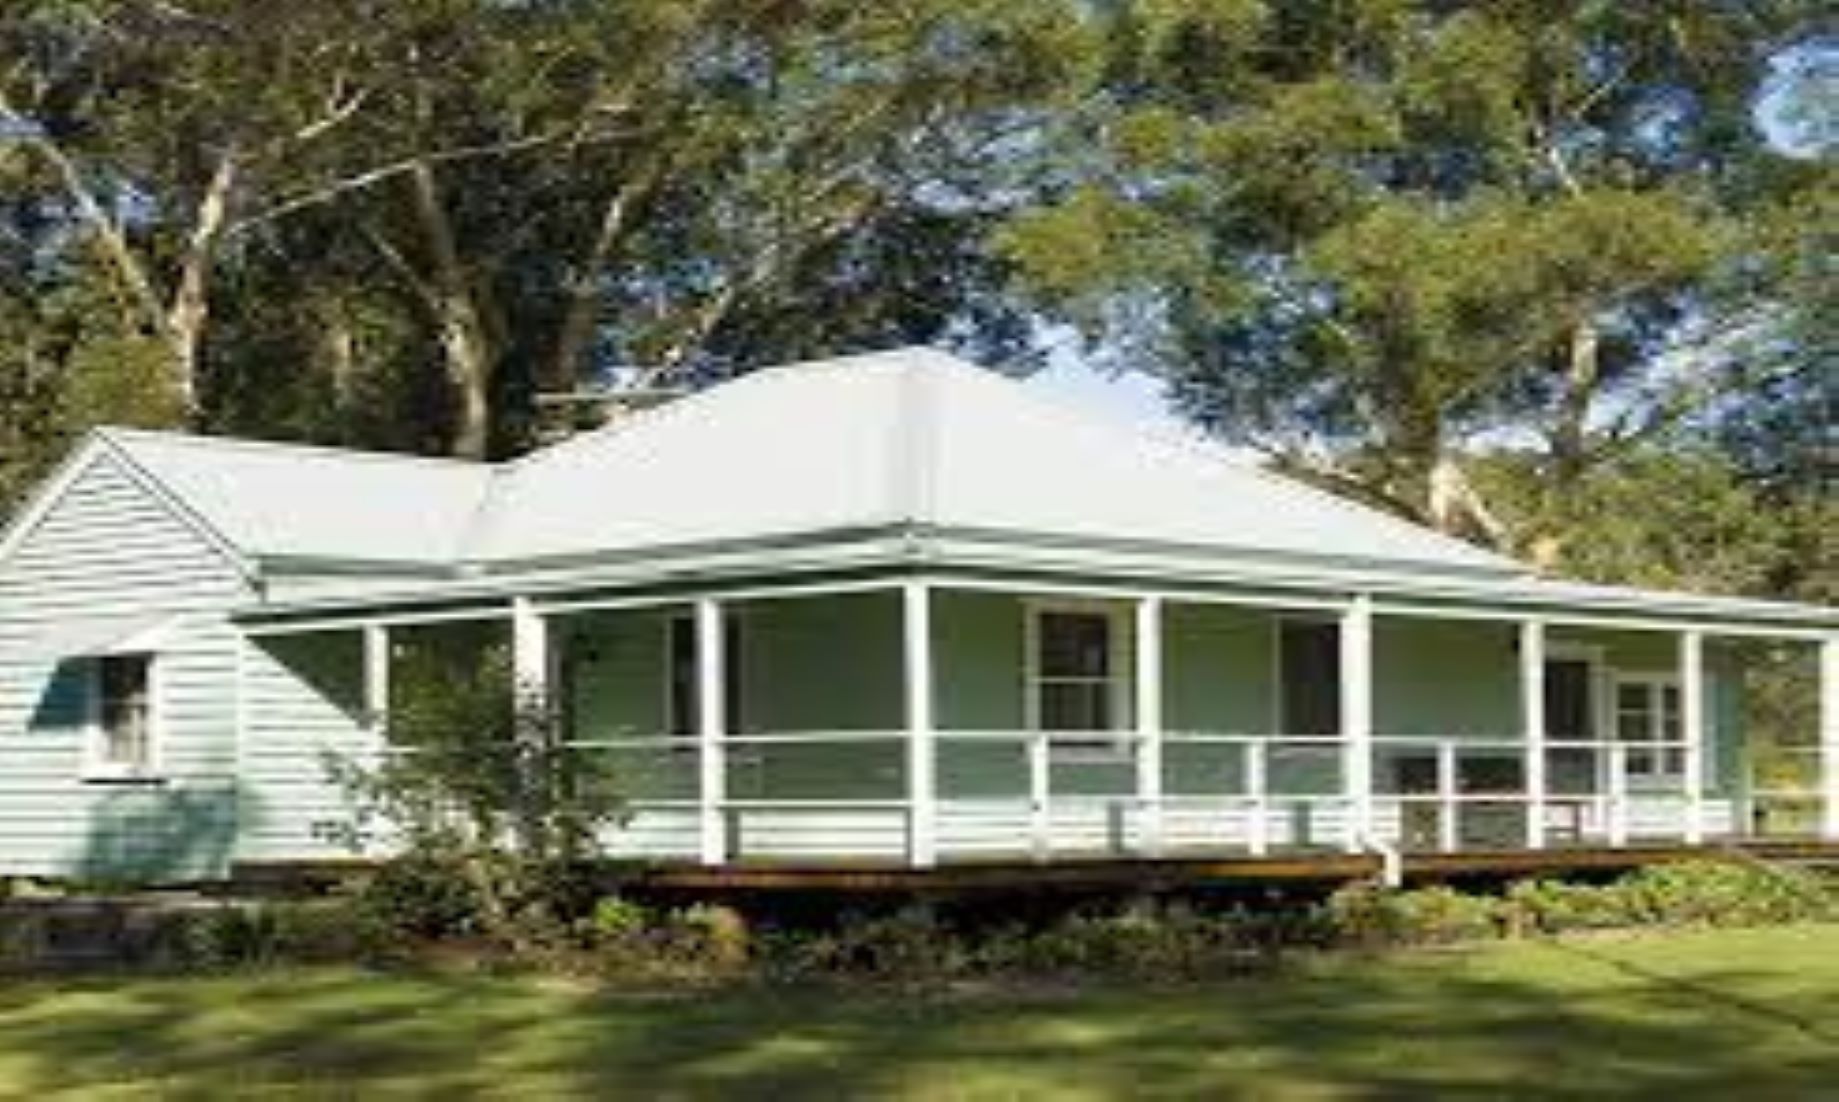 Hydrogen Power System Put On Trial Use In Australia’s Heritage Cottage